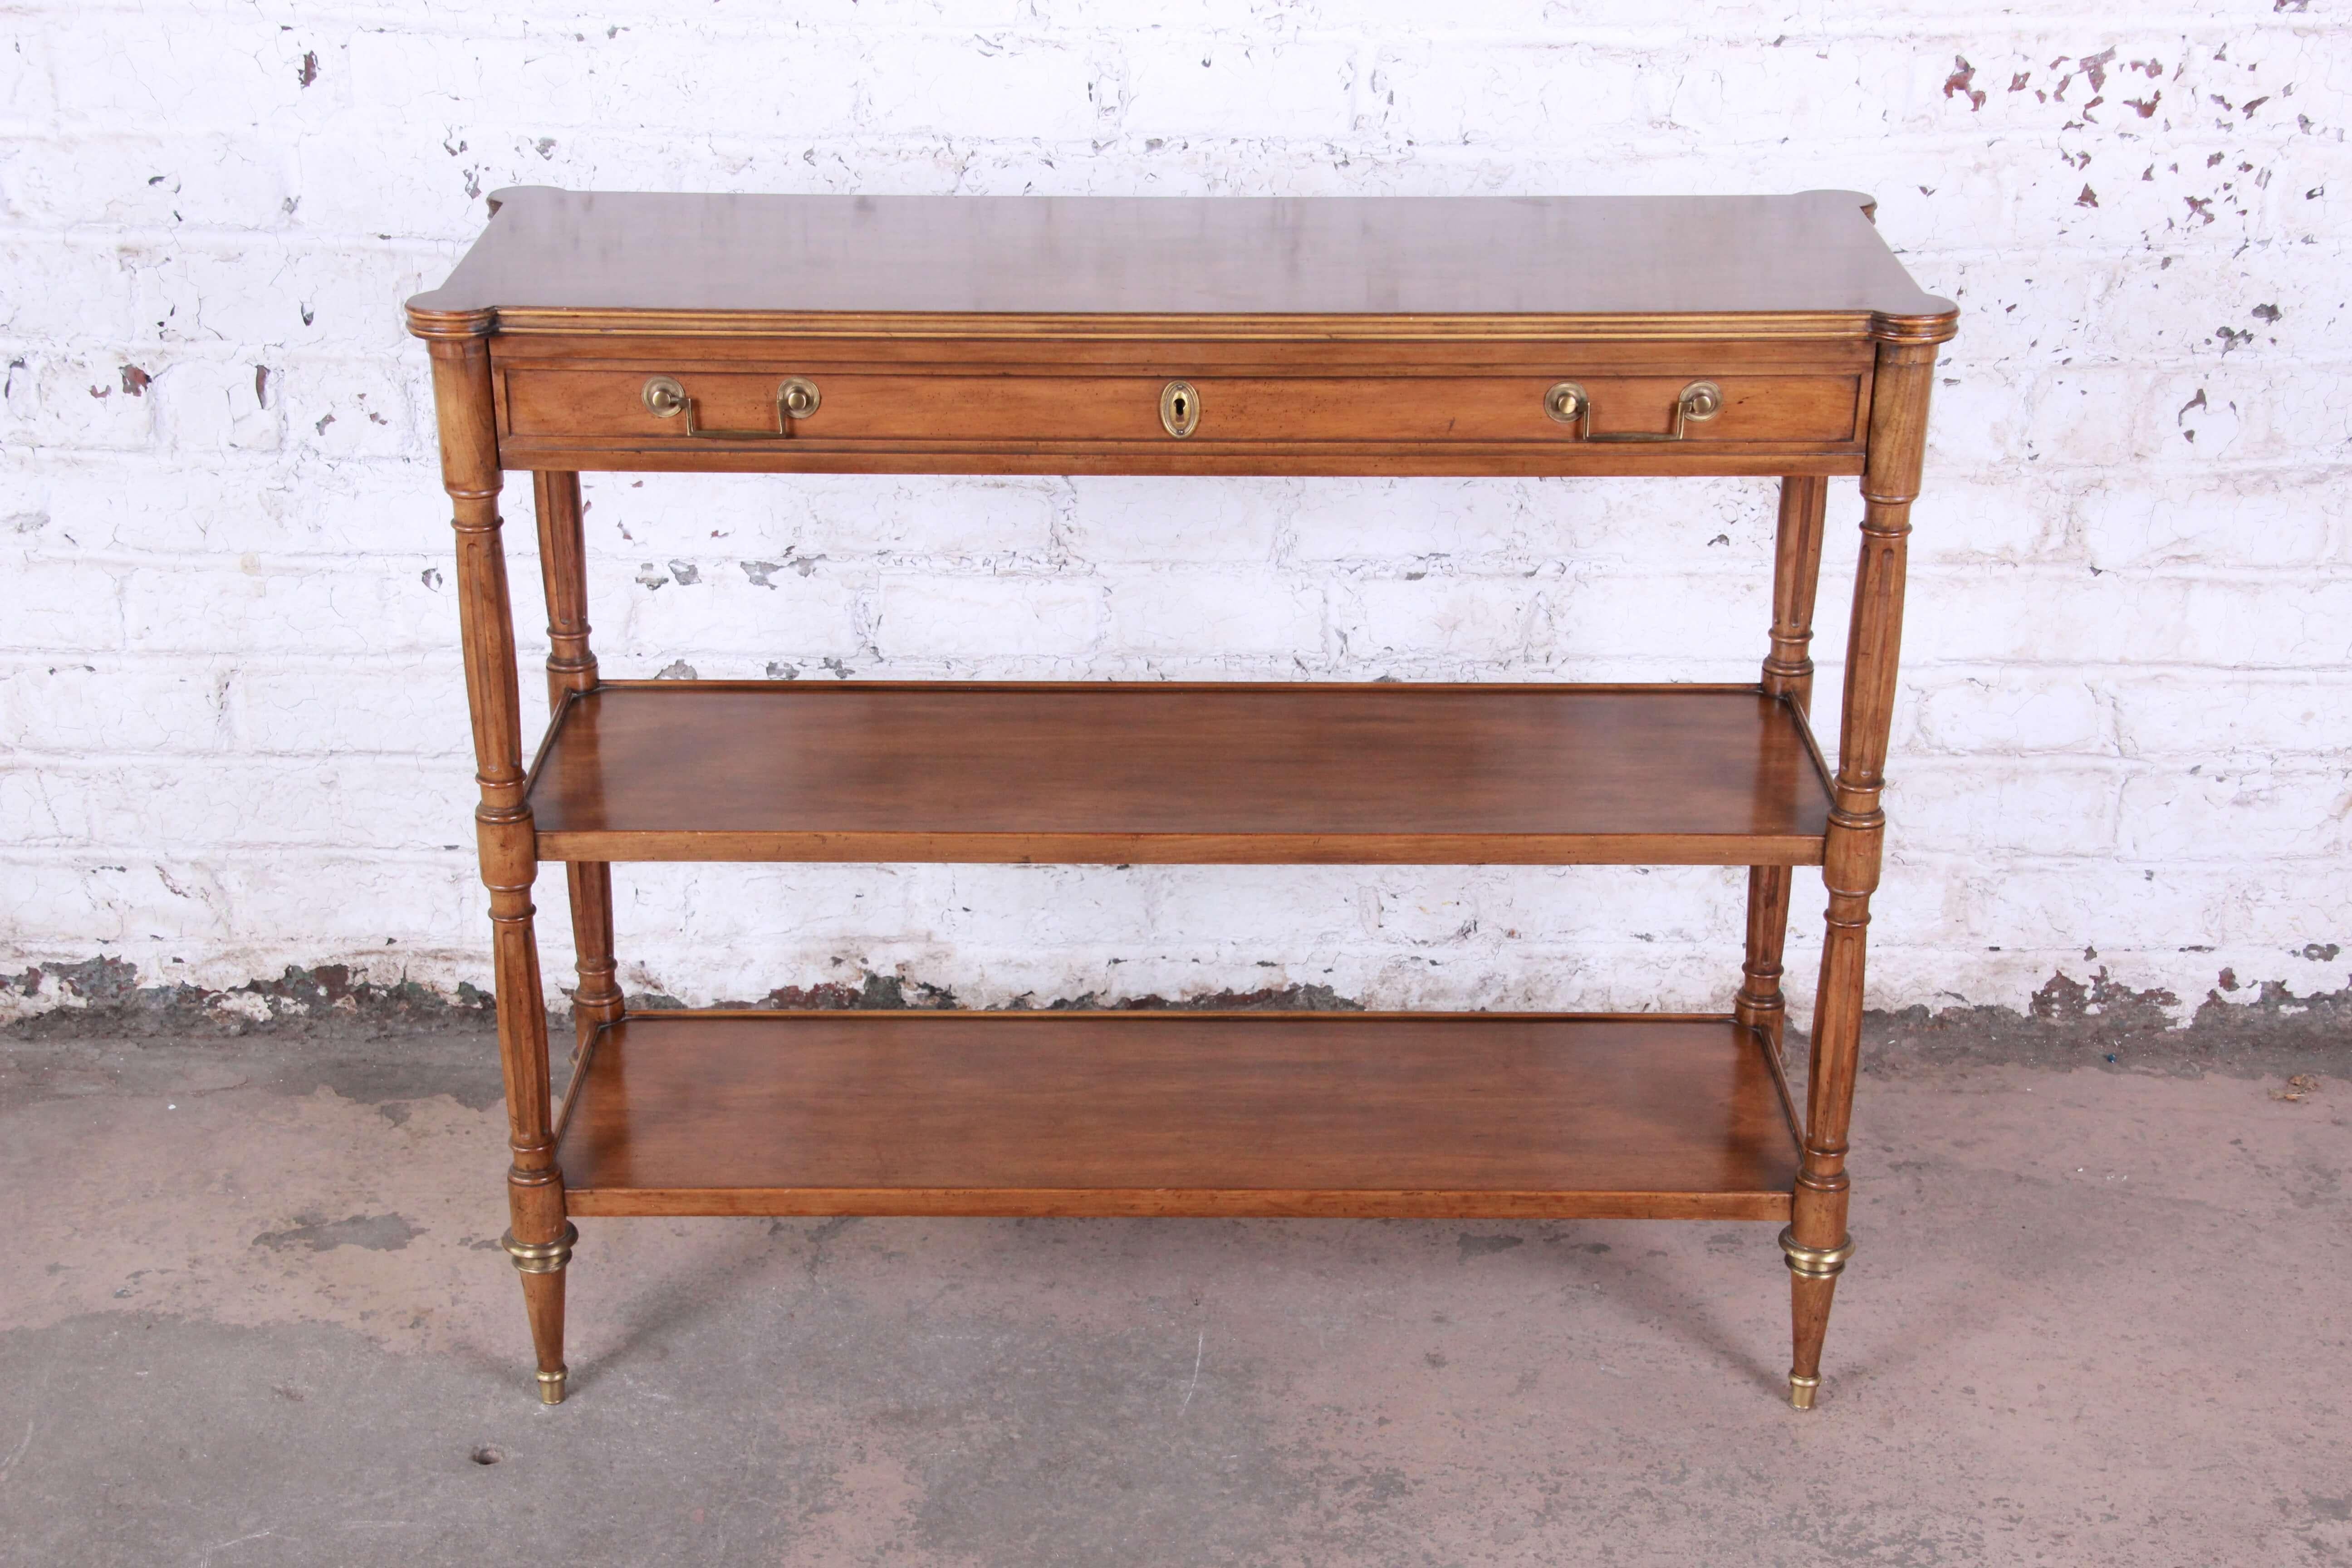 Offering a very nice Baker Furniture French Regency style bar serve or console table. The piece has a nice three-tier feature along with a large locking drawer. It has solid brass details displaying it quality and attention to detail. The piece is